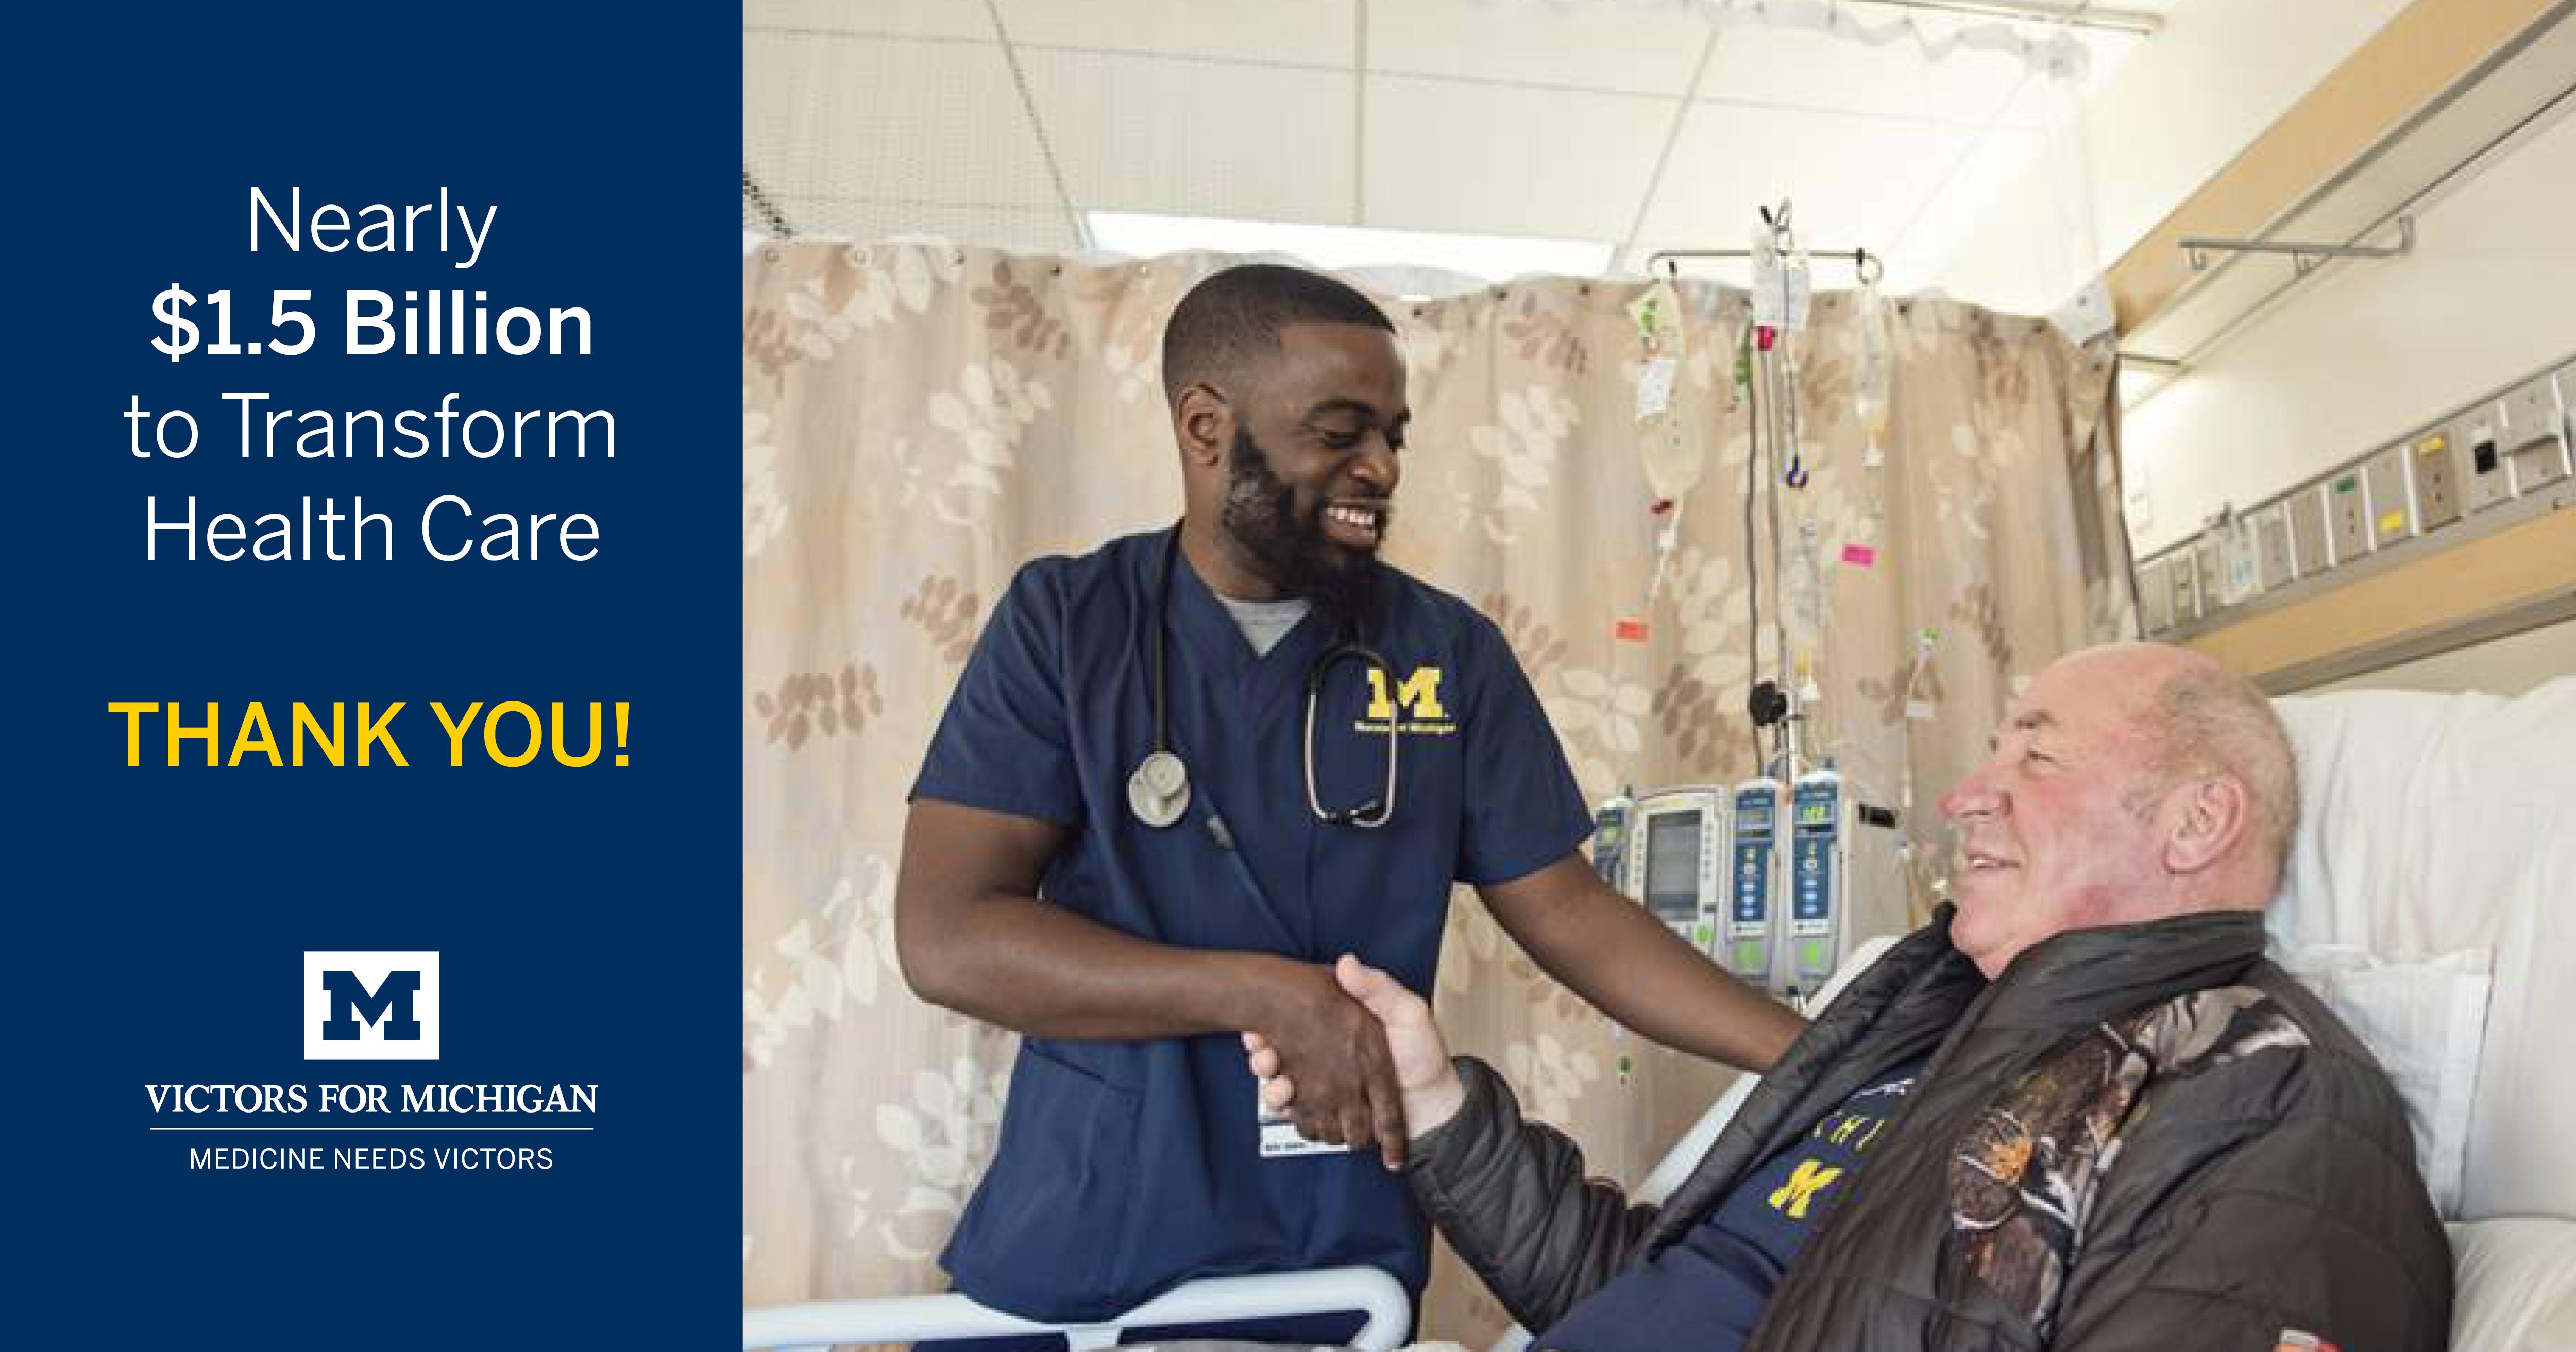 Victors for Michigan campaign most successful in health system history